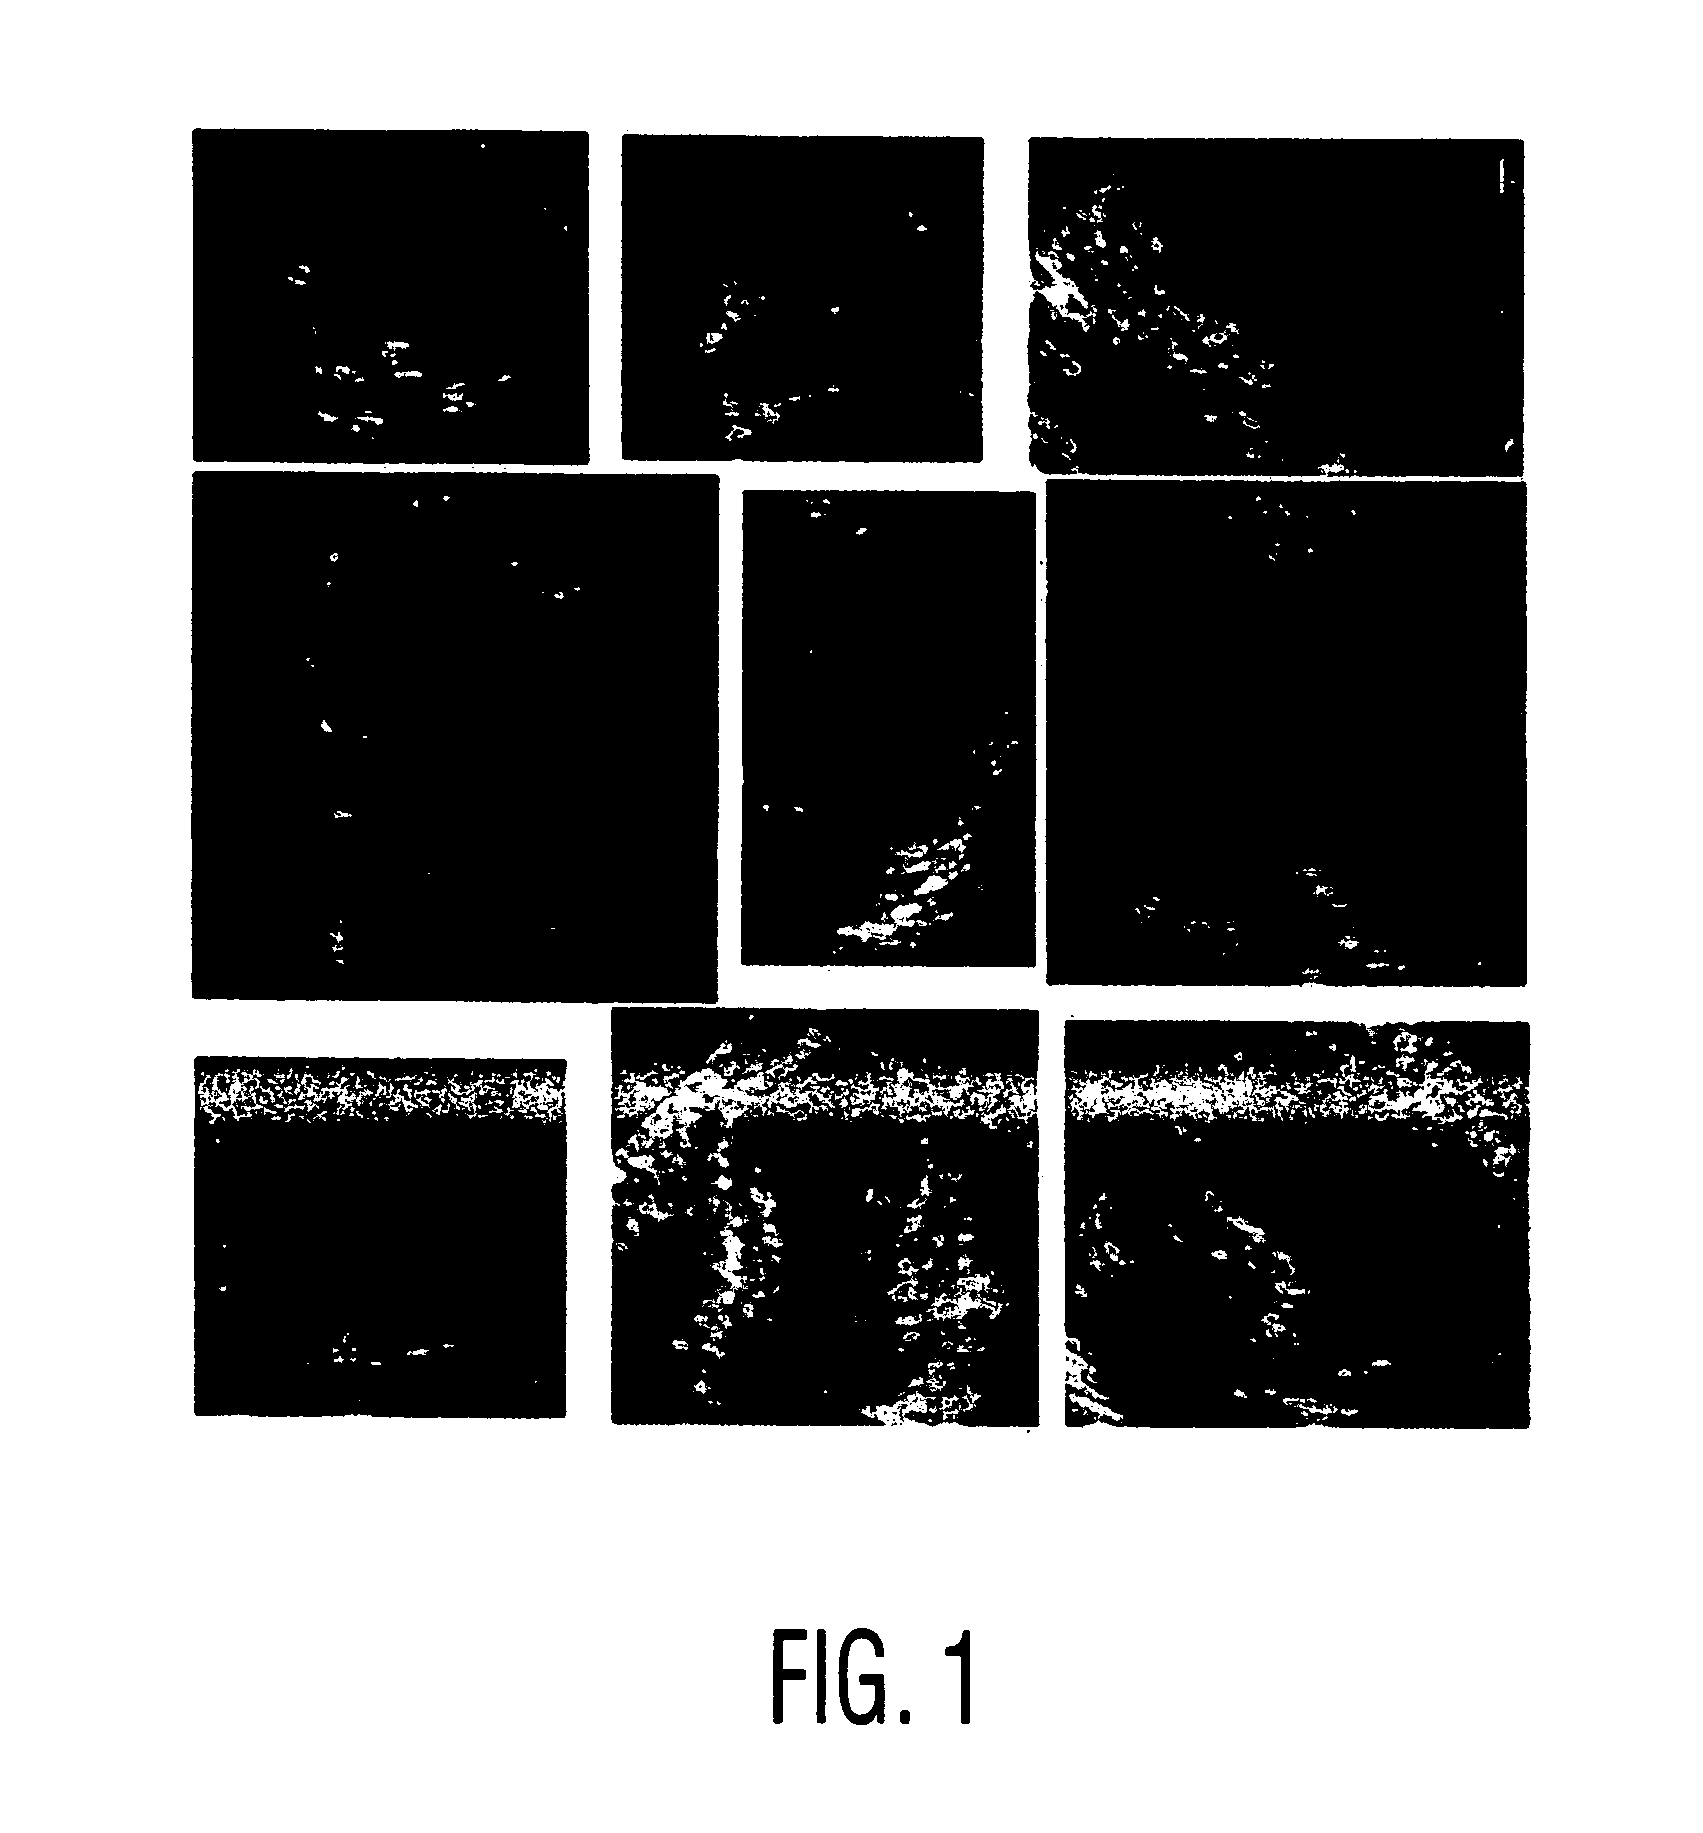 Method of database-guided segmentation of anatomical structures having complex appearances